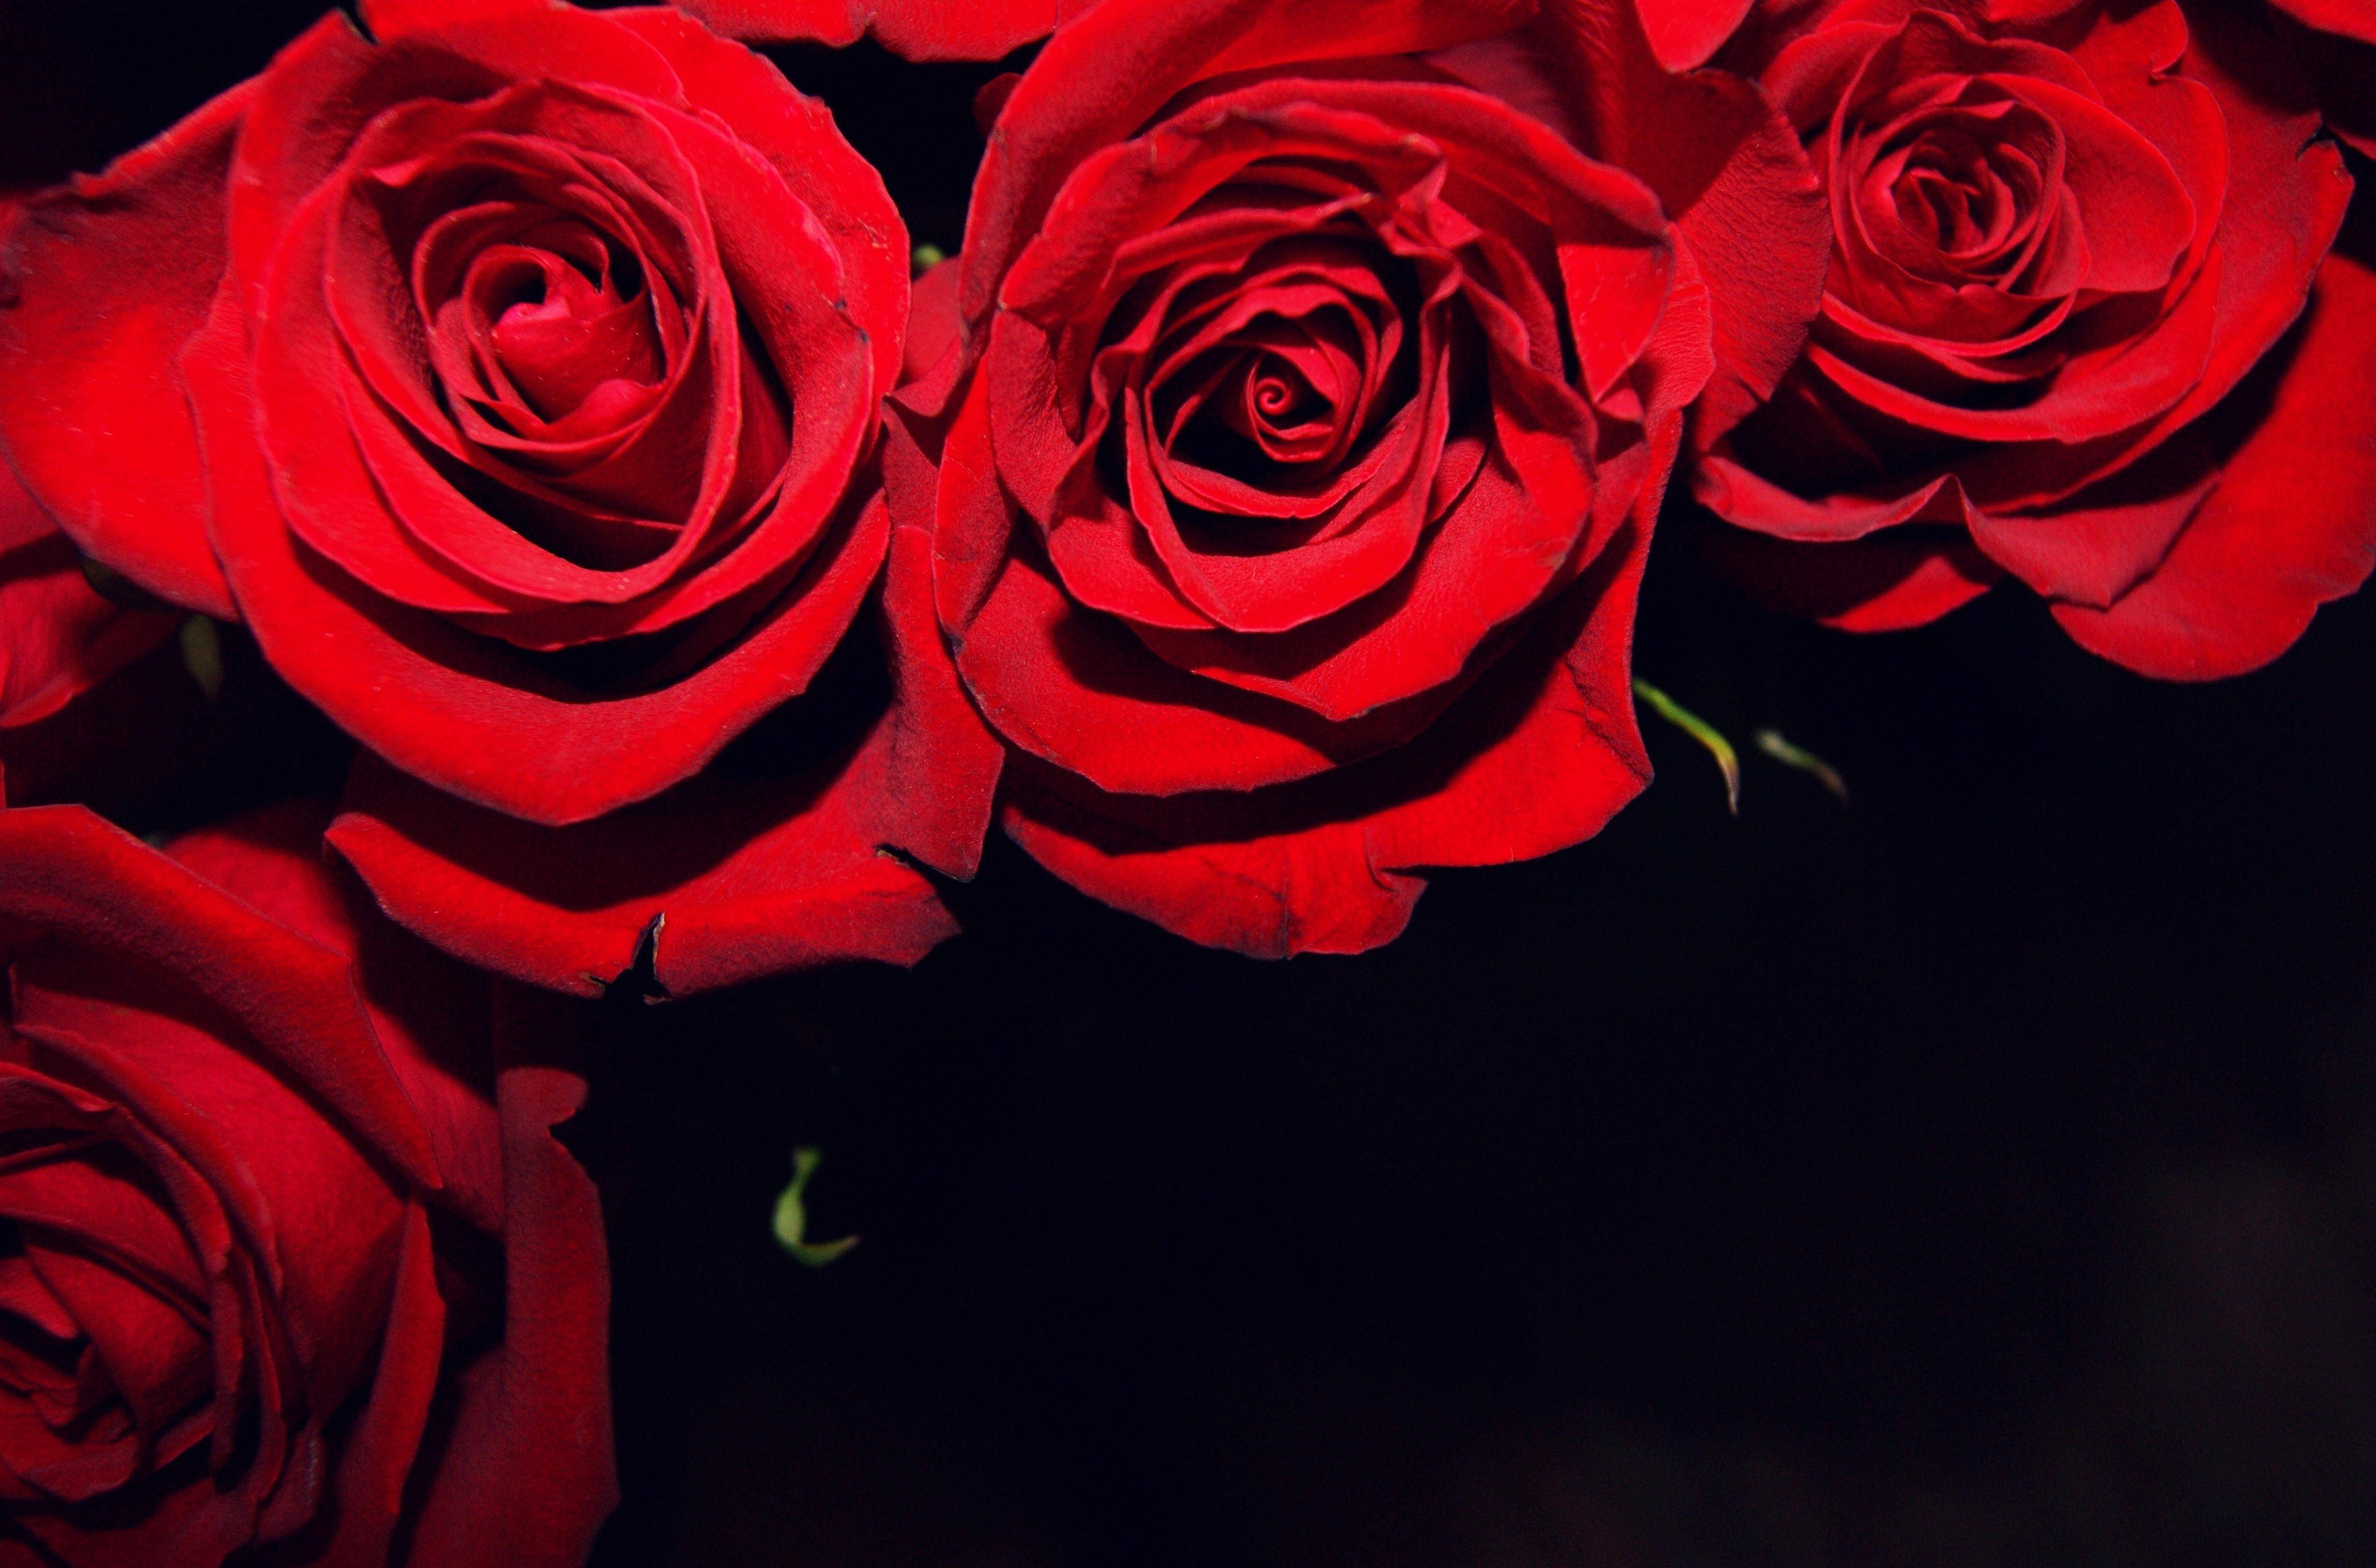 Red Roses On Black Background